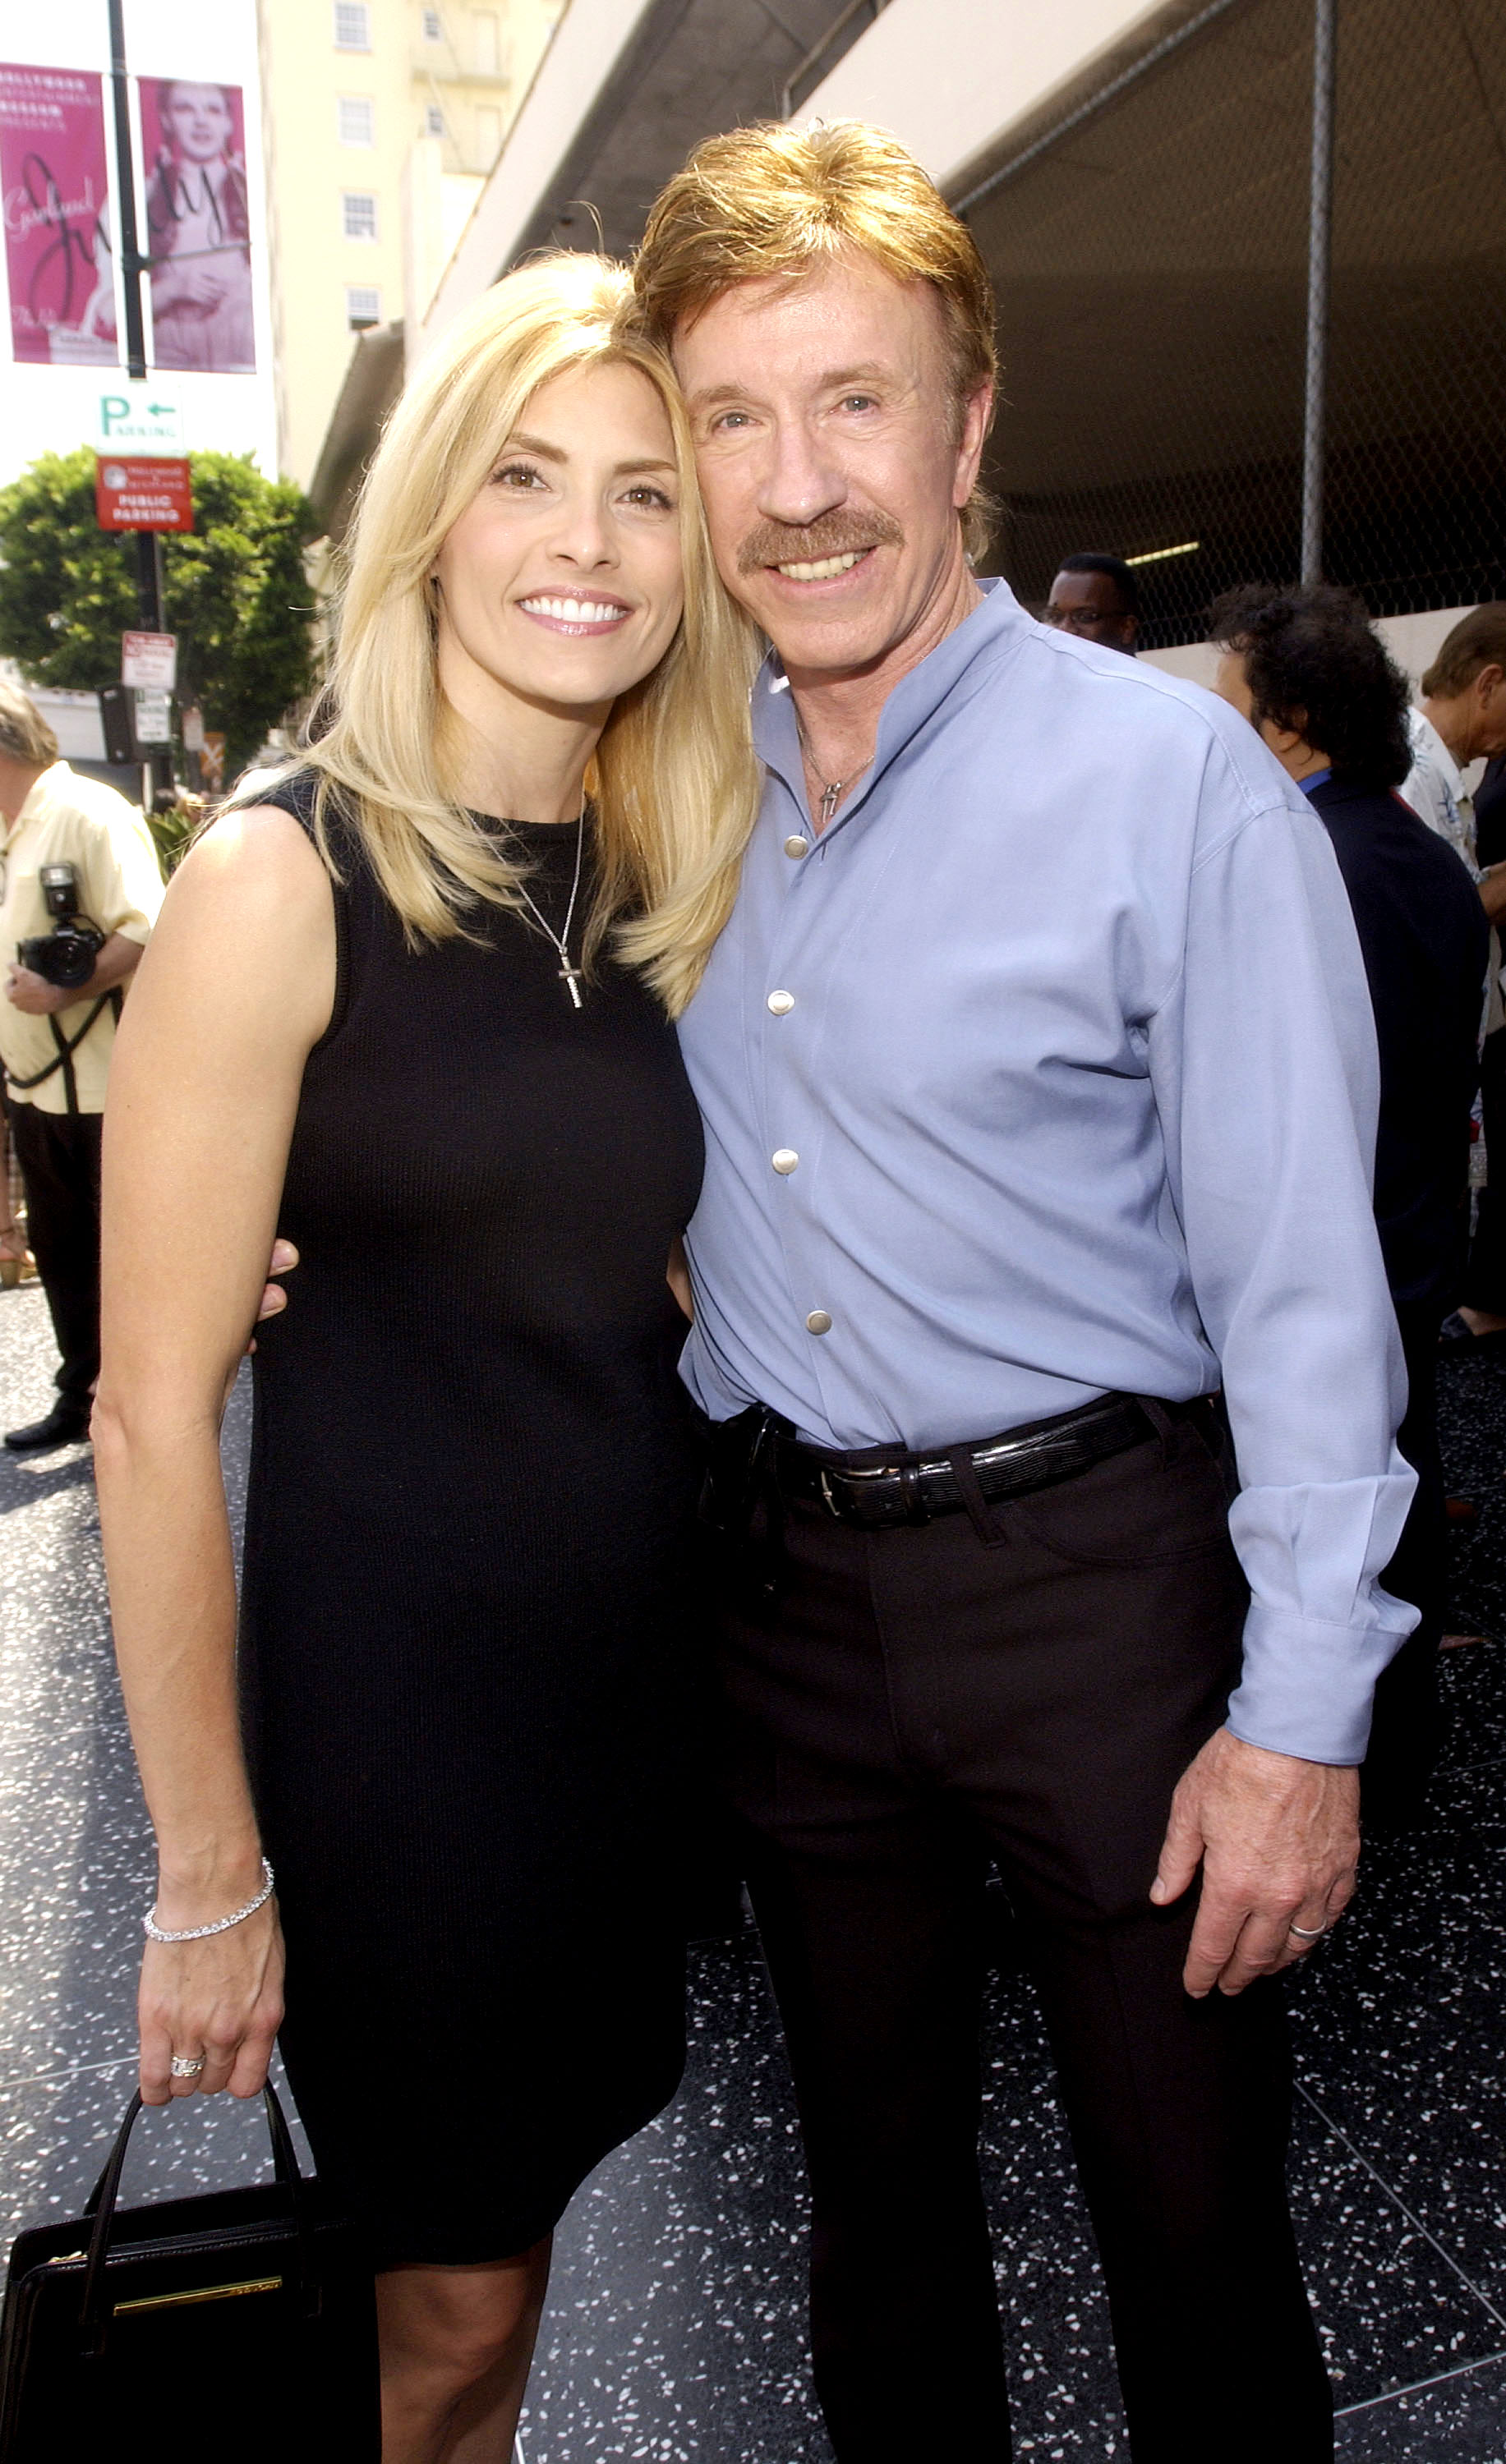 Gena O'Kelley and Chuck Norris at a Hollywood Walk of Fame star ceremony in 2002 | Source: Getty Images